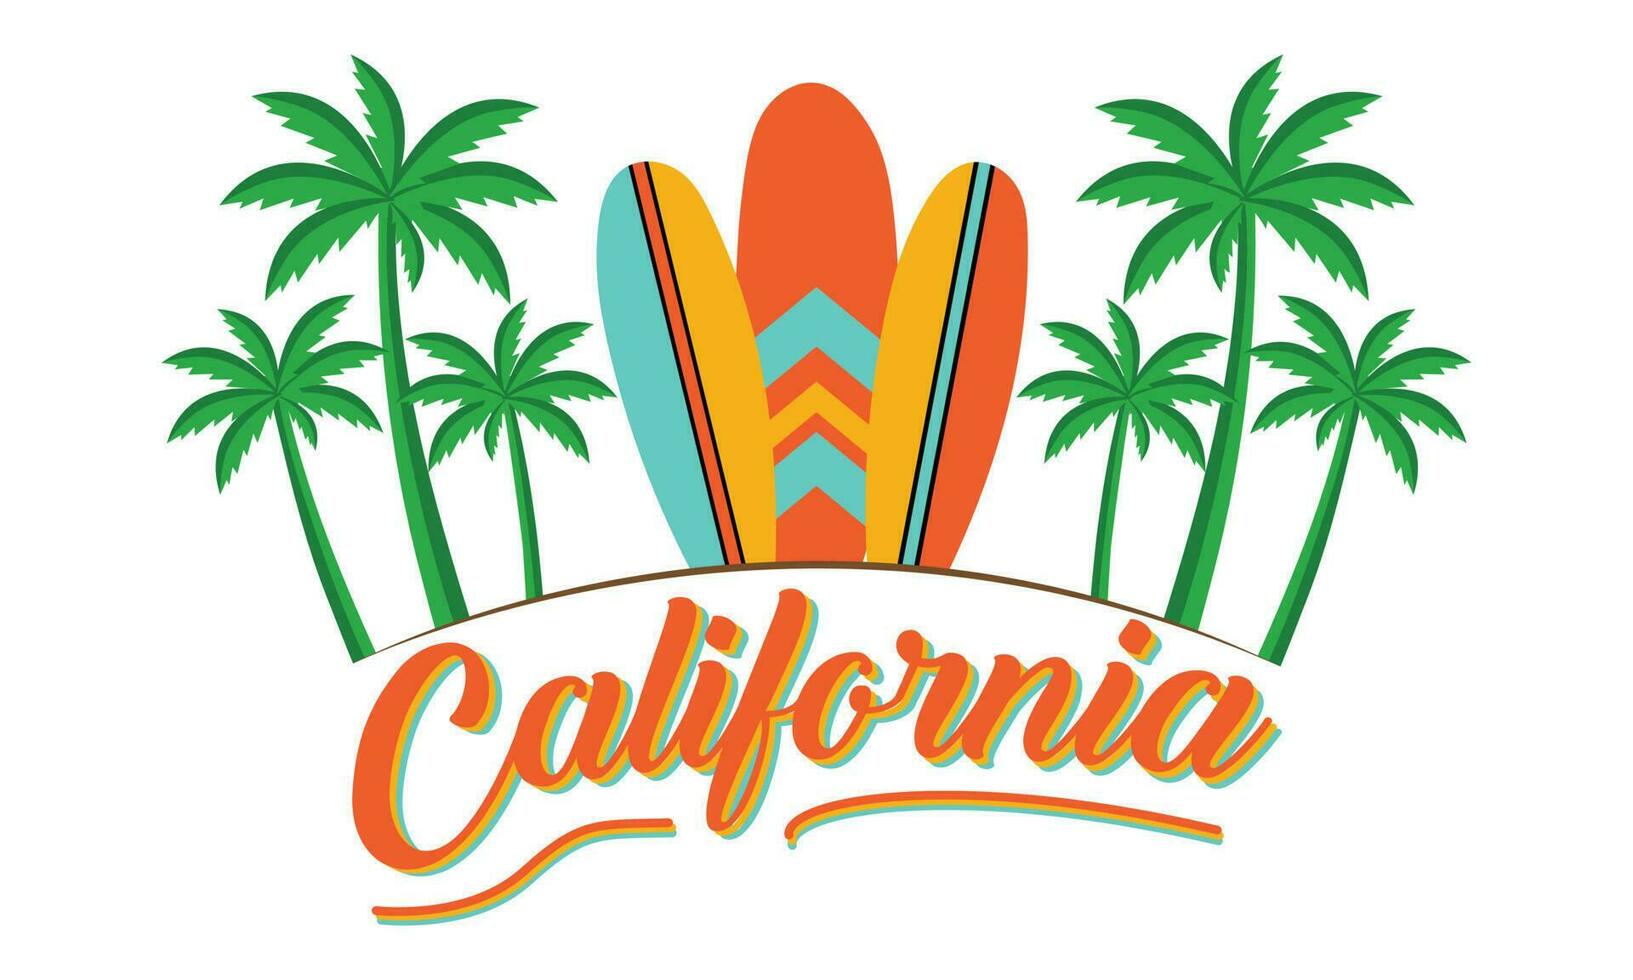 California T-shirt Design Vector Illustration Surf all Day, Slogan Text With Palm Trees And Surf Boards. For T-shirt Prints And Other Uses .And Apparel Trendy Design With Palm Trees Silhouettes